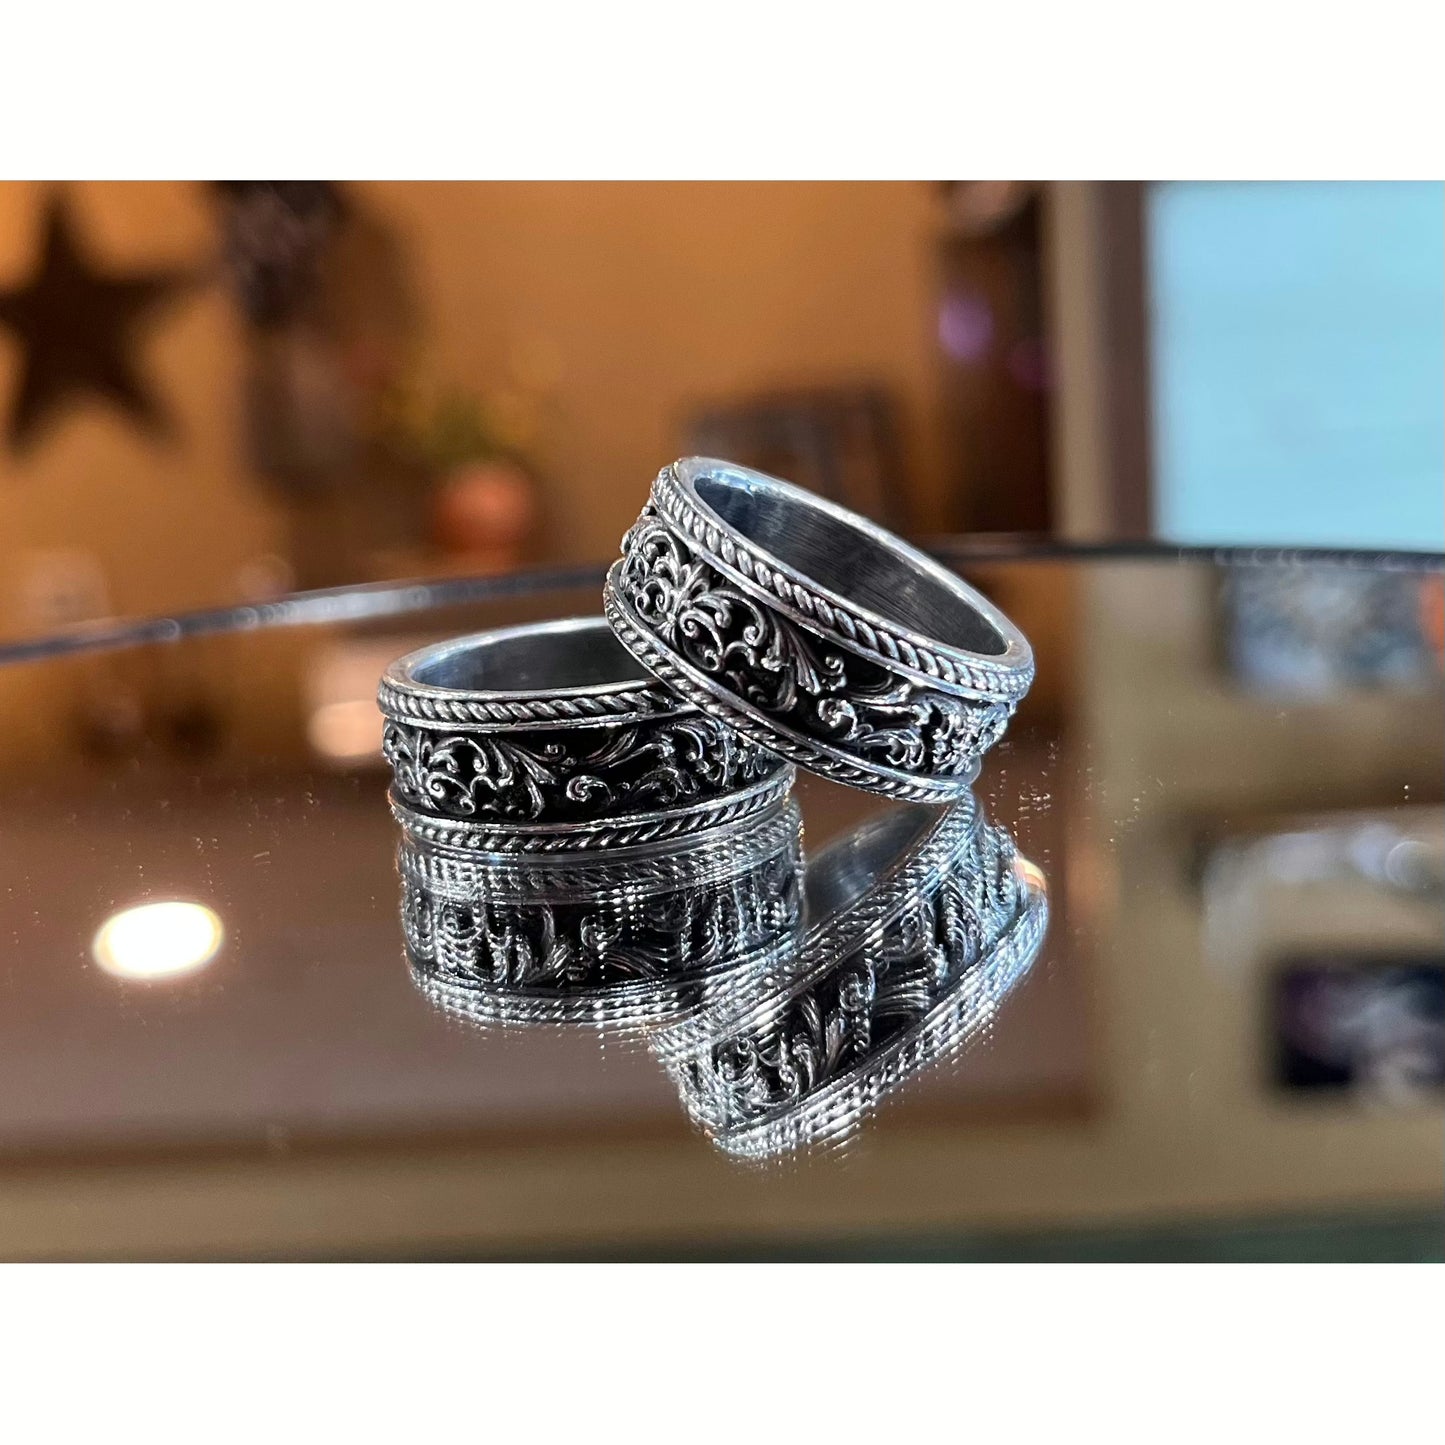 This custom band shows Justin's craftsmanship through the Victorian scrollwork on this sterling silver band finished off with a beautiful antiquing.